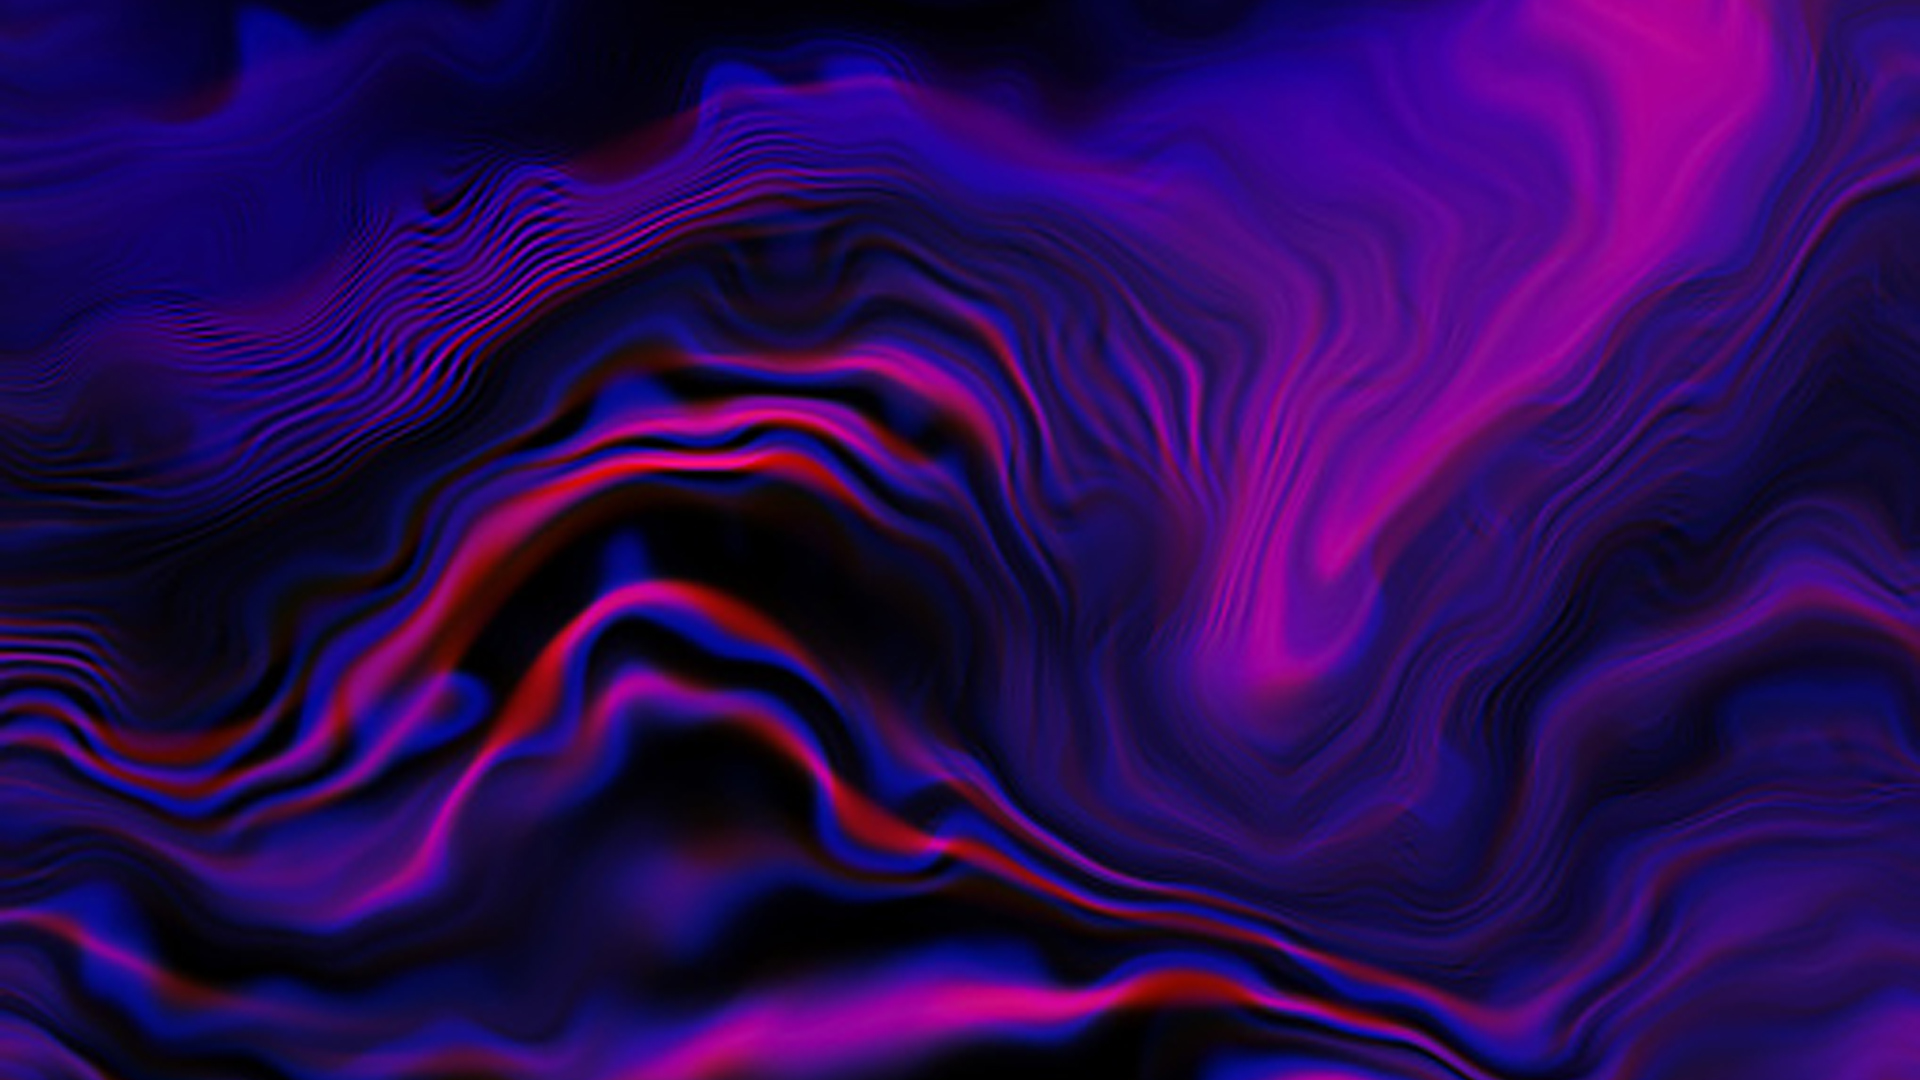 A purple and blue abstract artwork - Neon pink